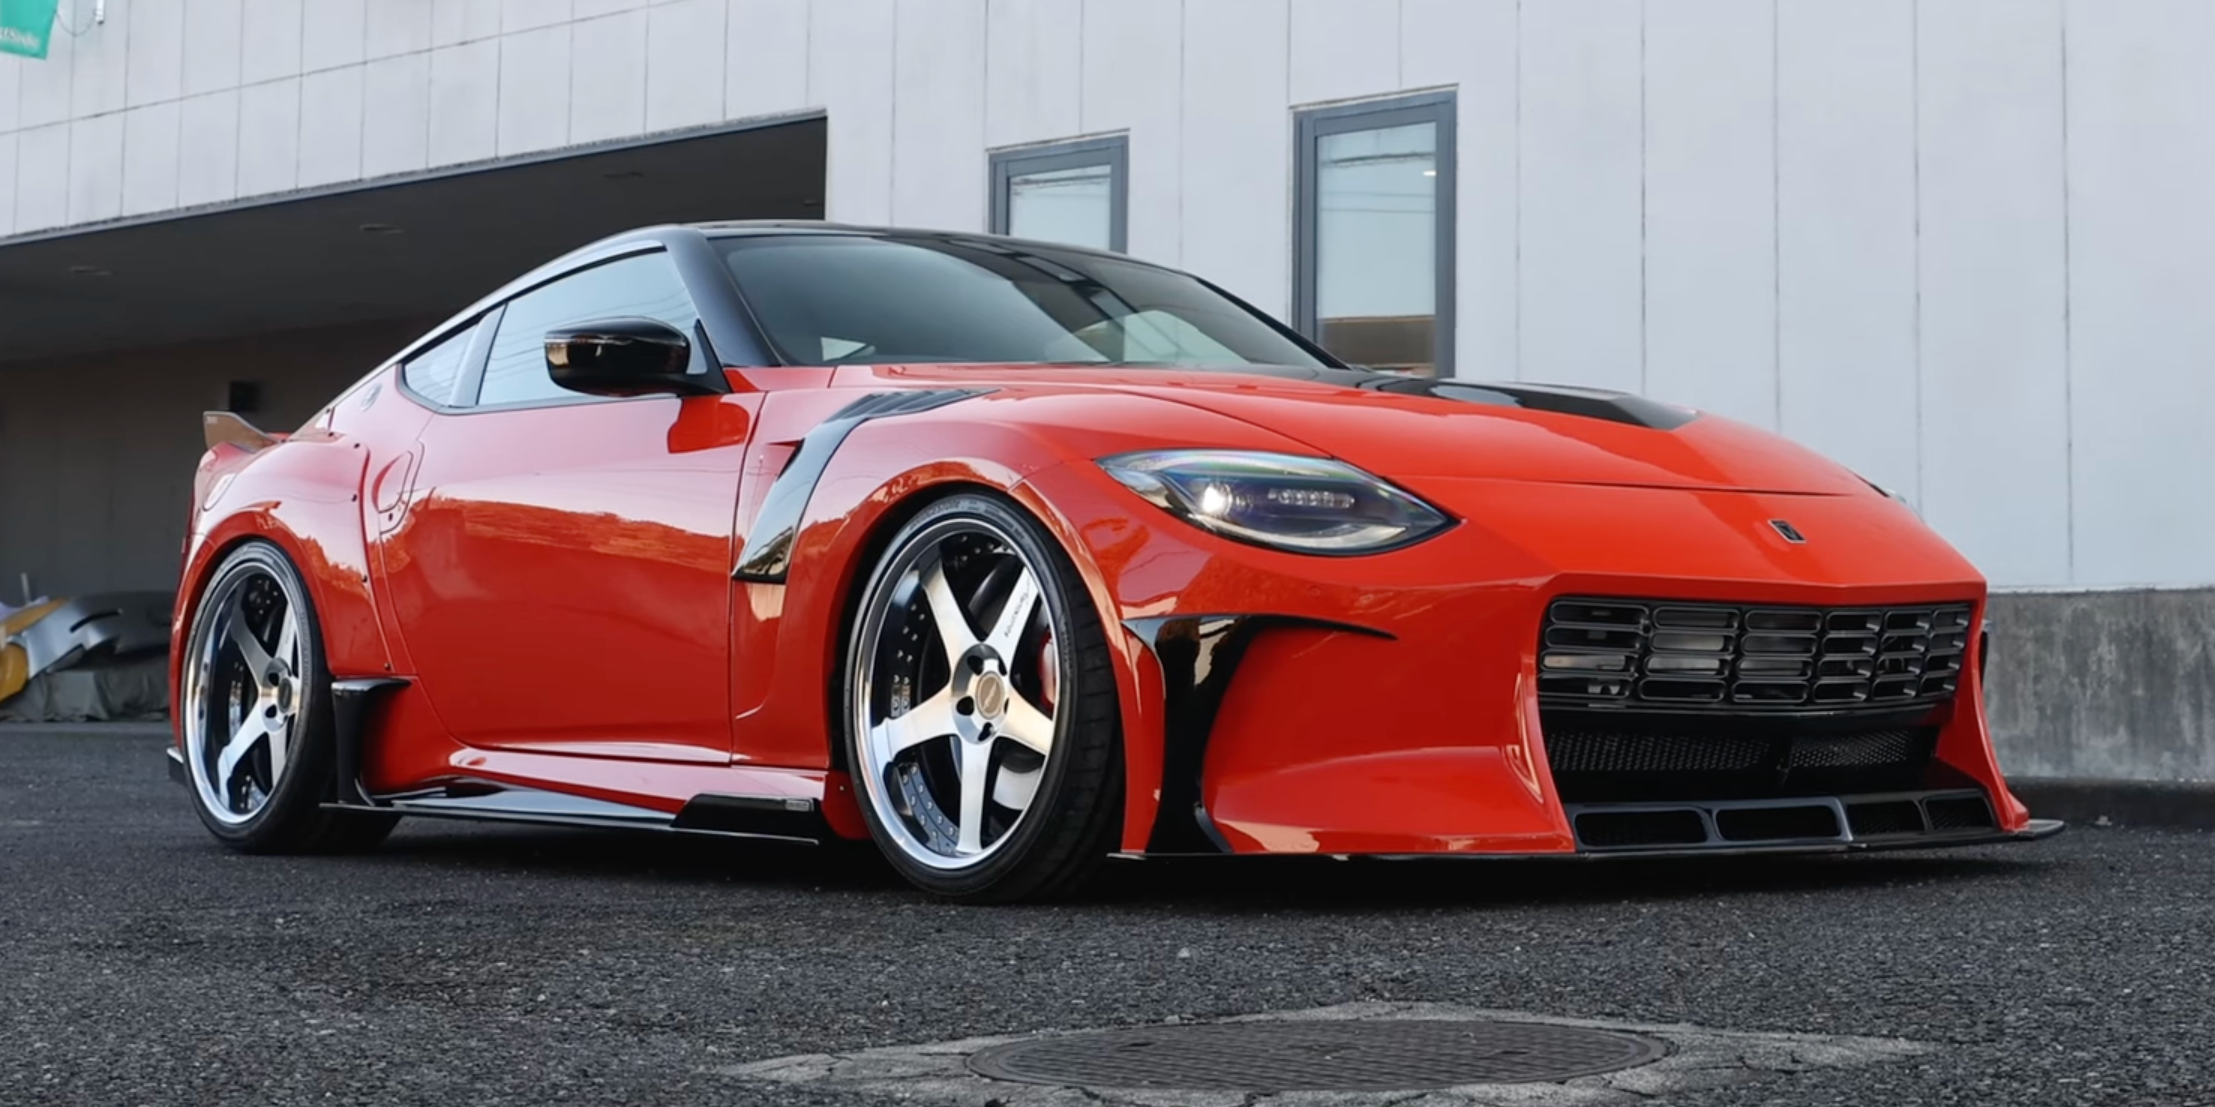 Sung Kang and VeilSide Team Up to Design a One-Off Widebody Nissan Z